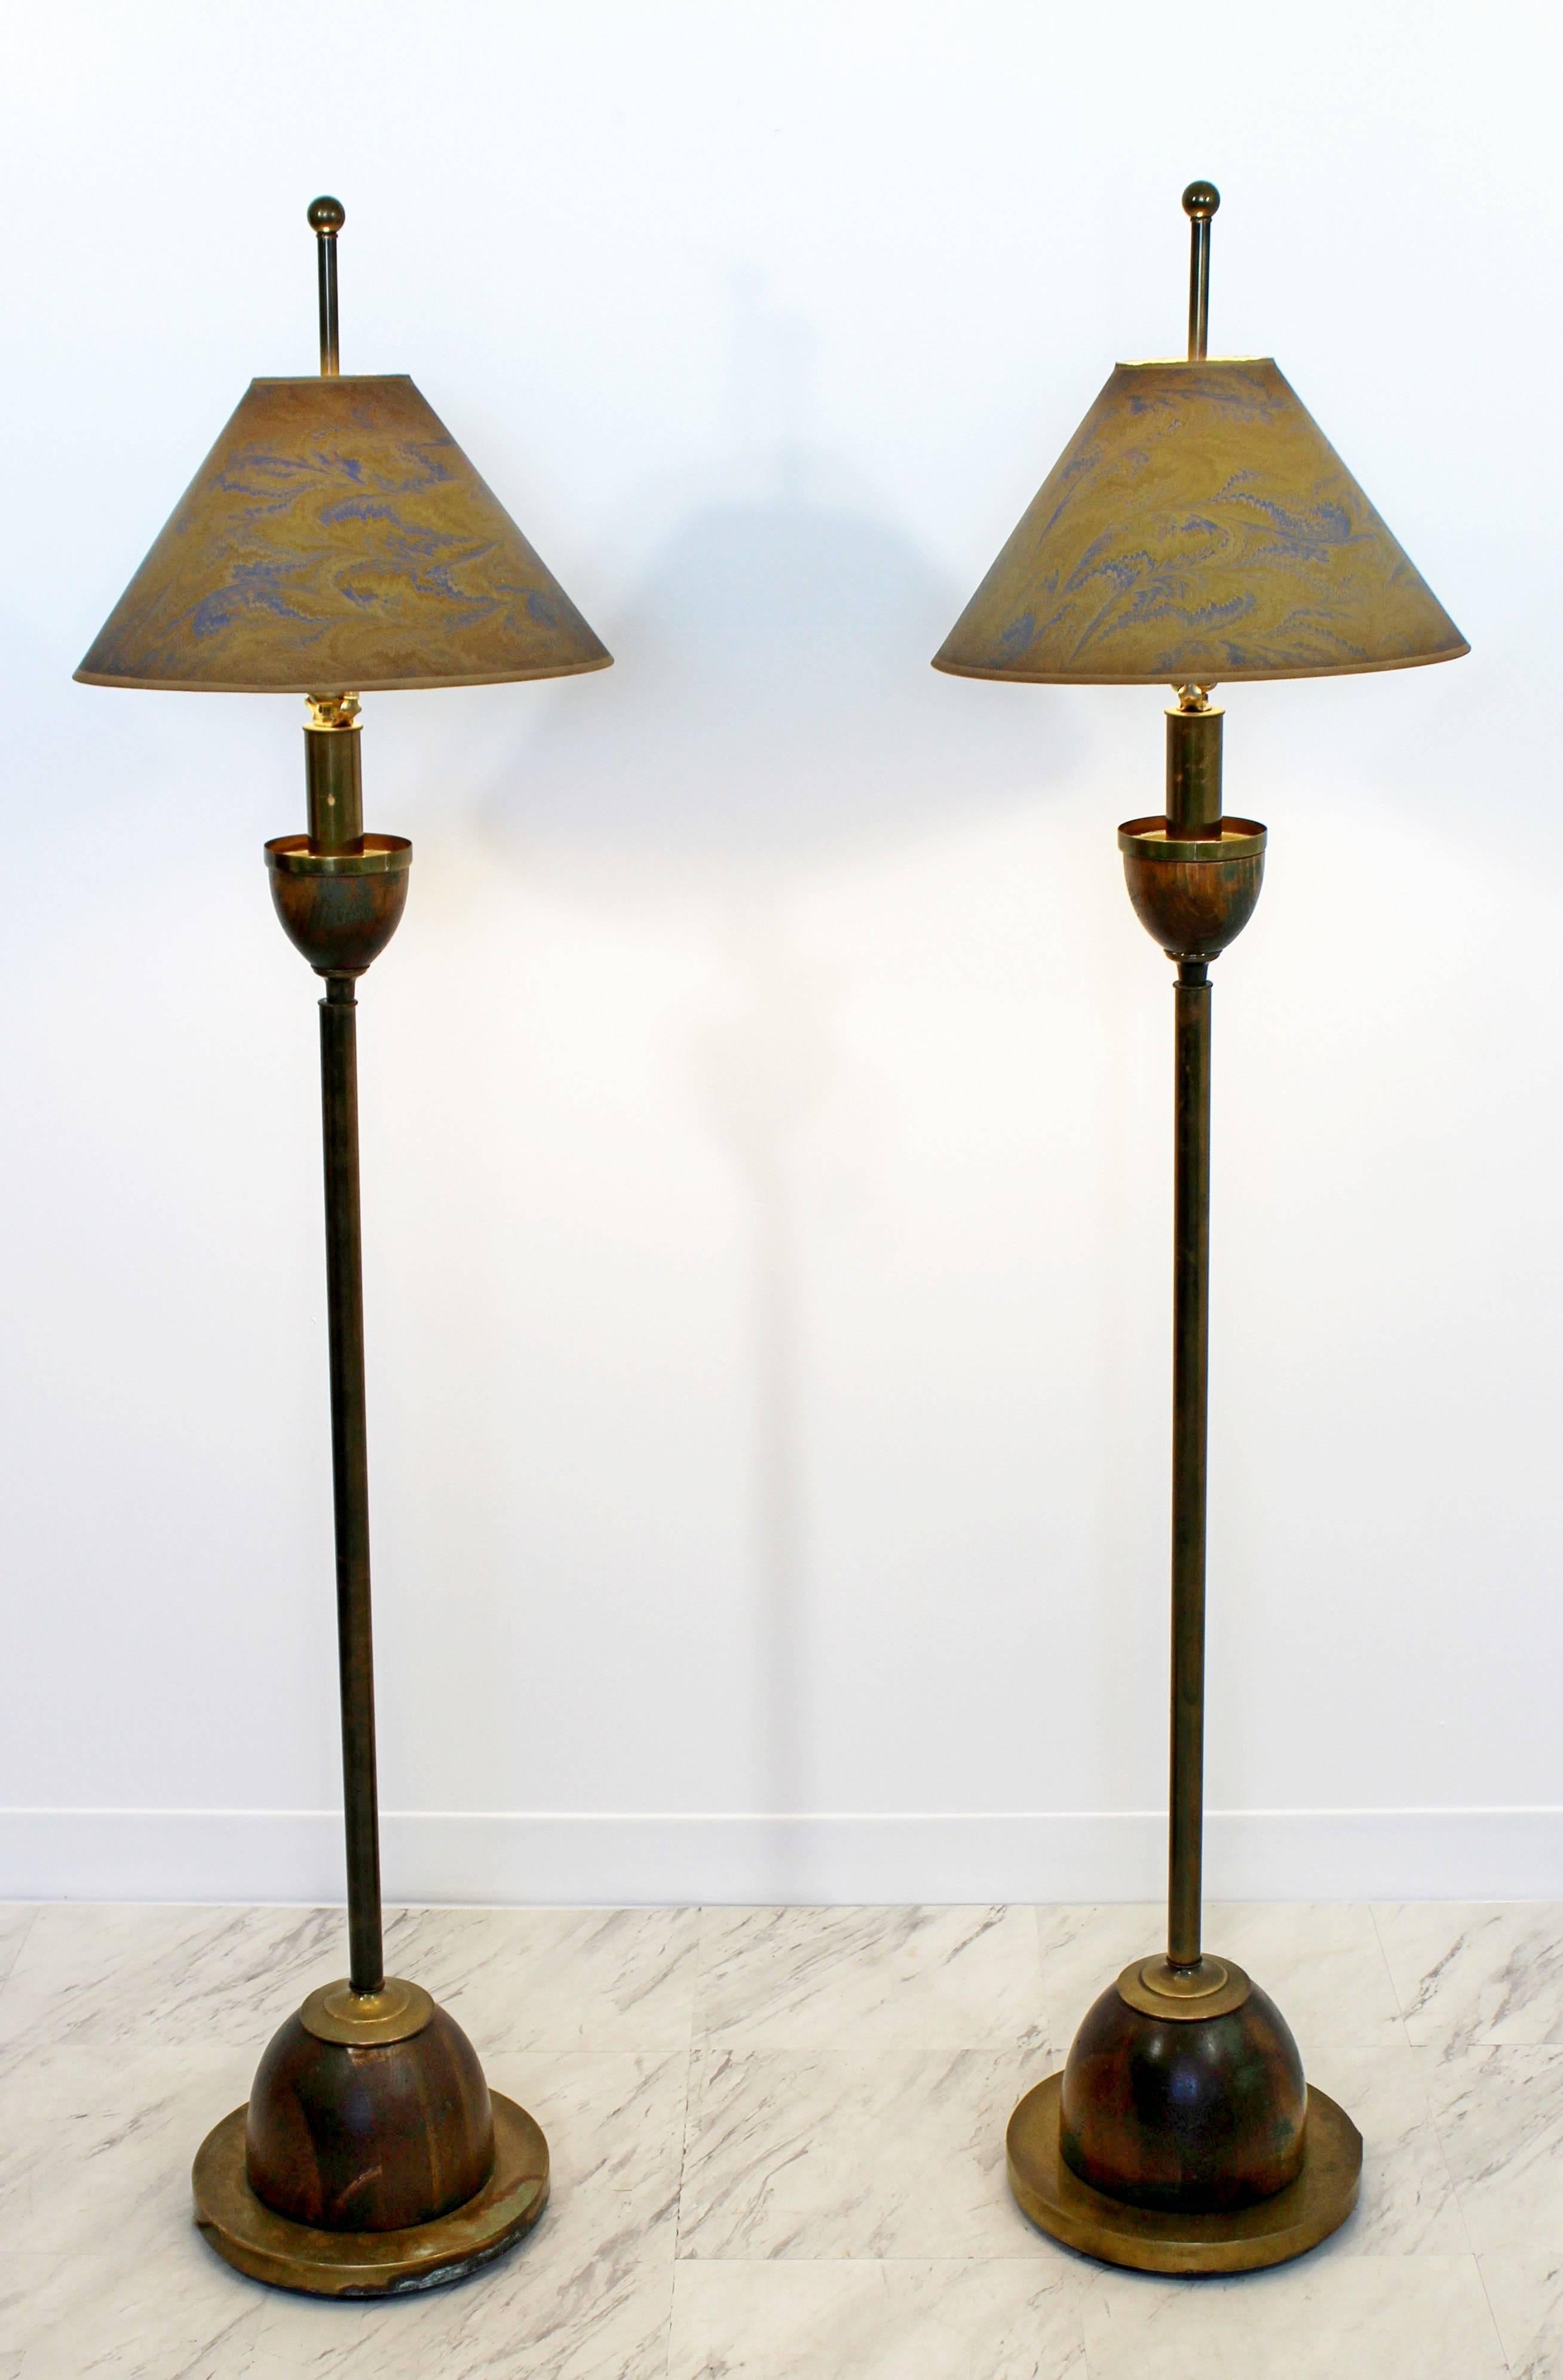 For your consideration is an incredible pair of solid brass floor lamps, by Hart Associates, including original shades and finials. In excellent condition. The dimensions are 9